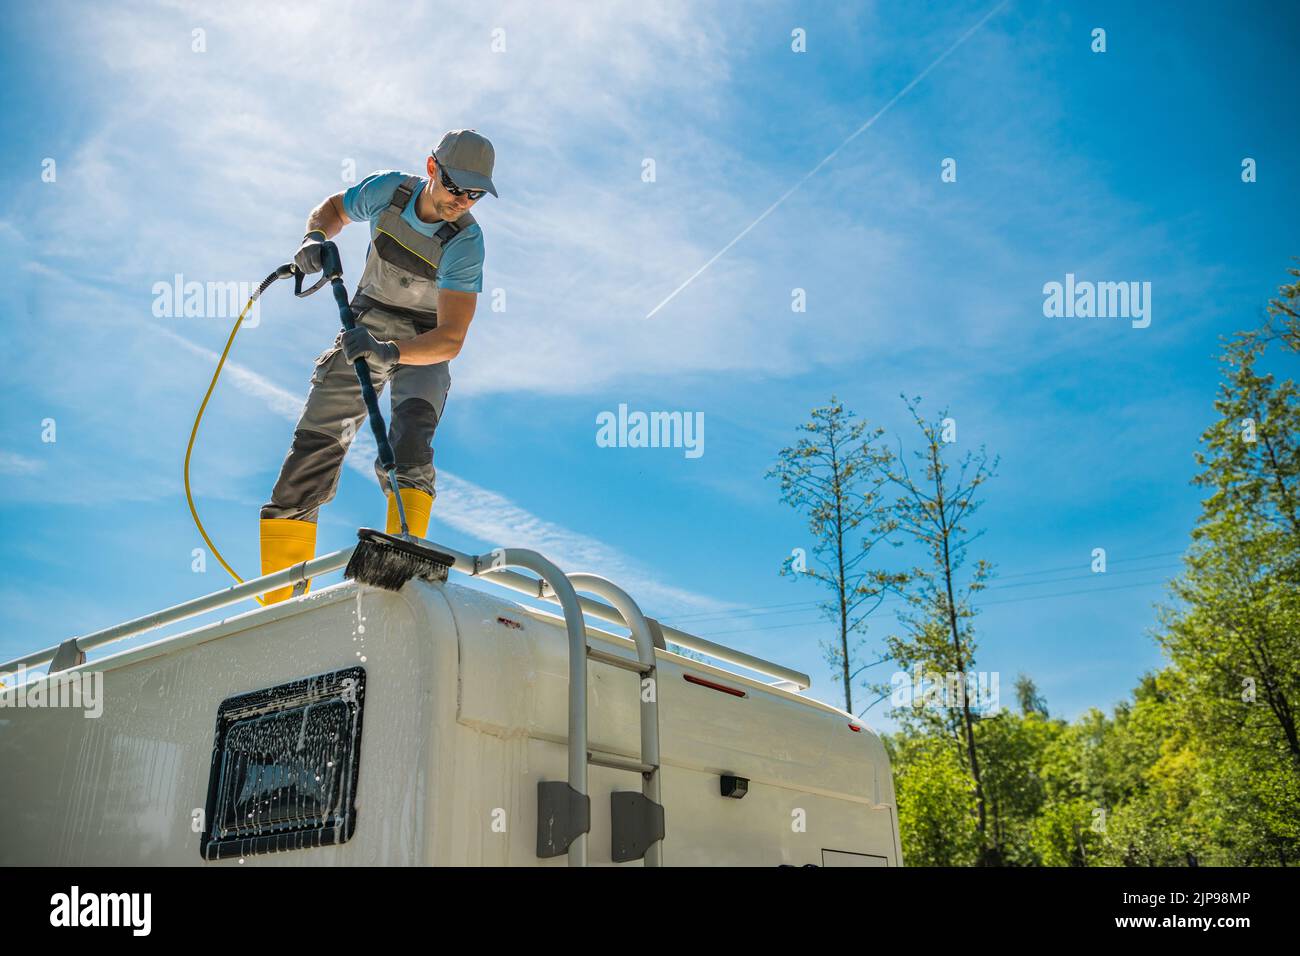 Caucasian Man in Uniform and Yellow Rubber Boots Standing on the Roof of White RV Cleaning the Surface with a Large Car Wash Brush. Clean Blue Sky and Stock Photo